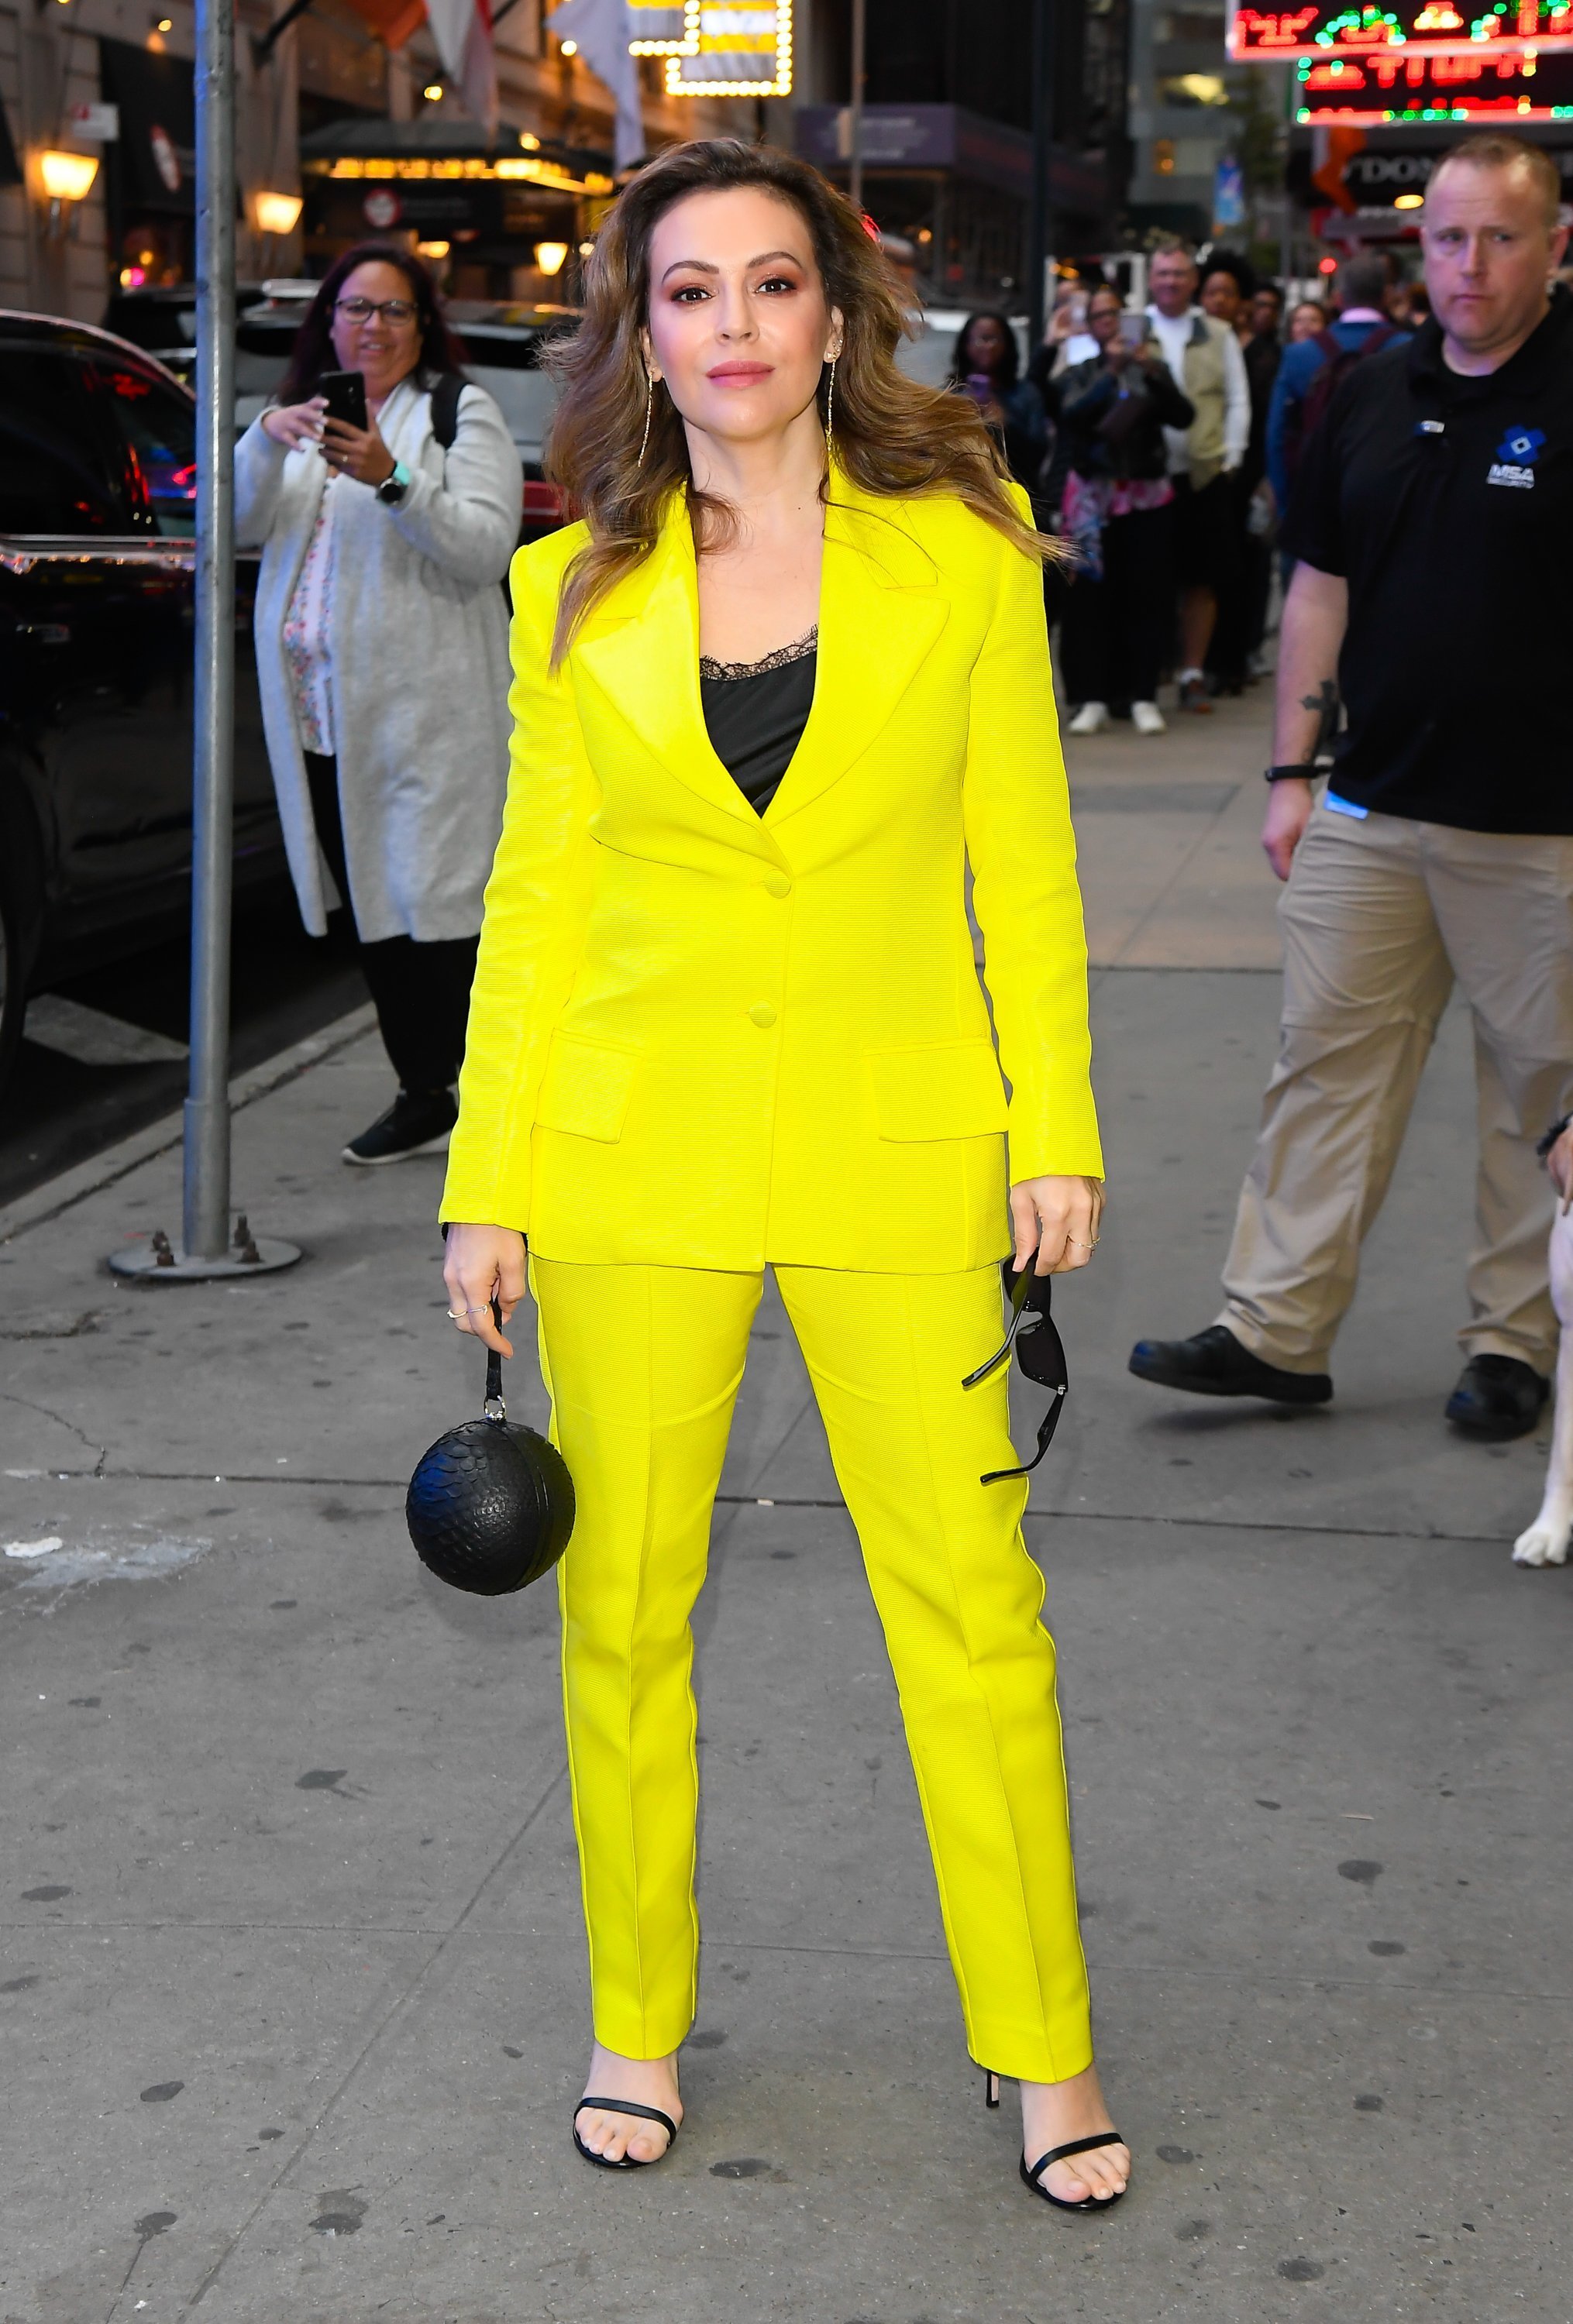 Alyssa Milano is seen outside Good Morning America on October 14, 2019 | Photo: GettyImages